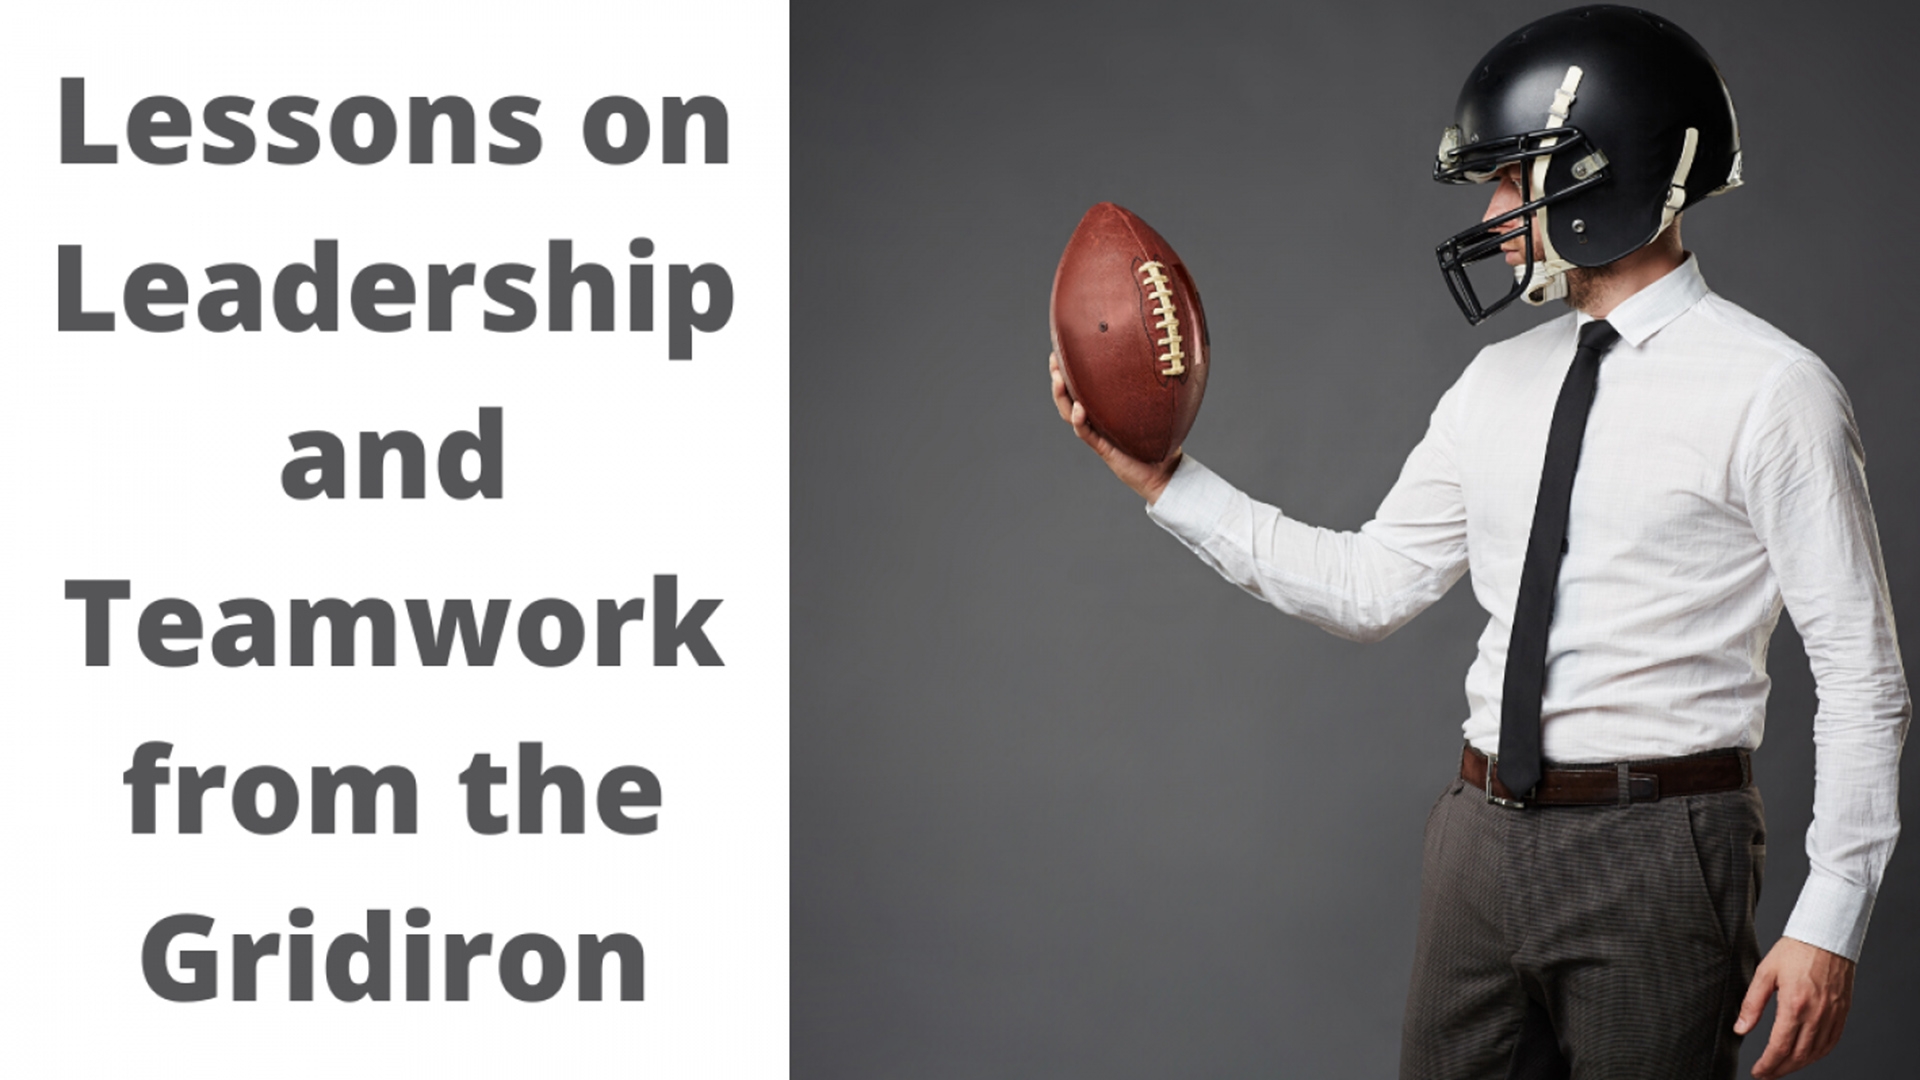 Lessons on Leadership and Teamwork from the Gridiron